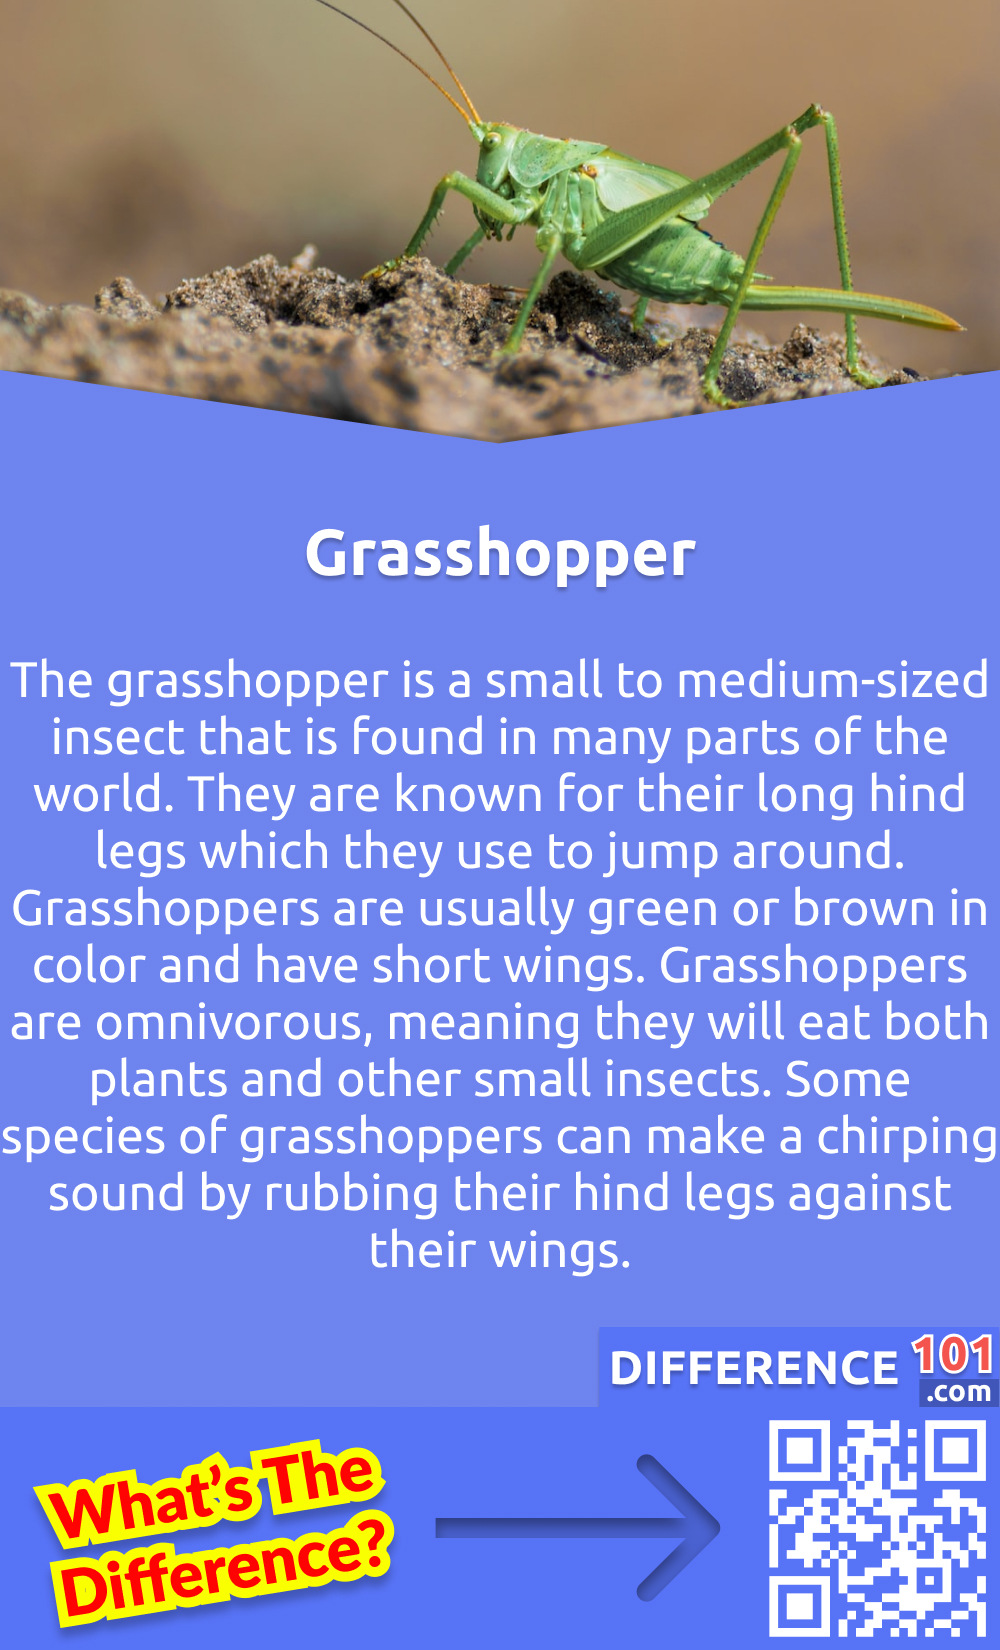 What Is Grasshopper? The grasshopper is a small to medium-sized insect that is found in many parts of the world. They are known for their long hind legs which they use to jump around. Grasshoppers are usually green or brown in color and have short wings. Grasshoppers are omnivorous, meaning they will eat both plants and other small insects. Some species of grasshoppers can make a chirping sound by rubbing their hind legs against their wings.